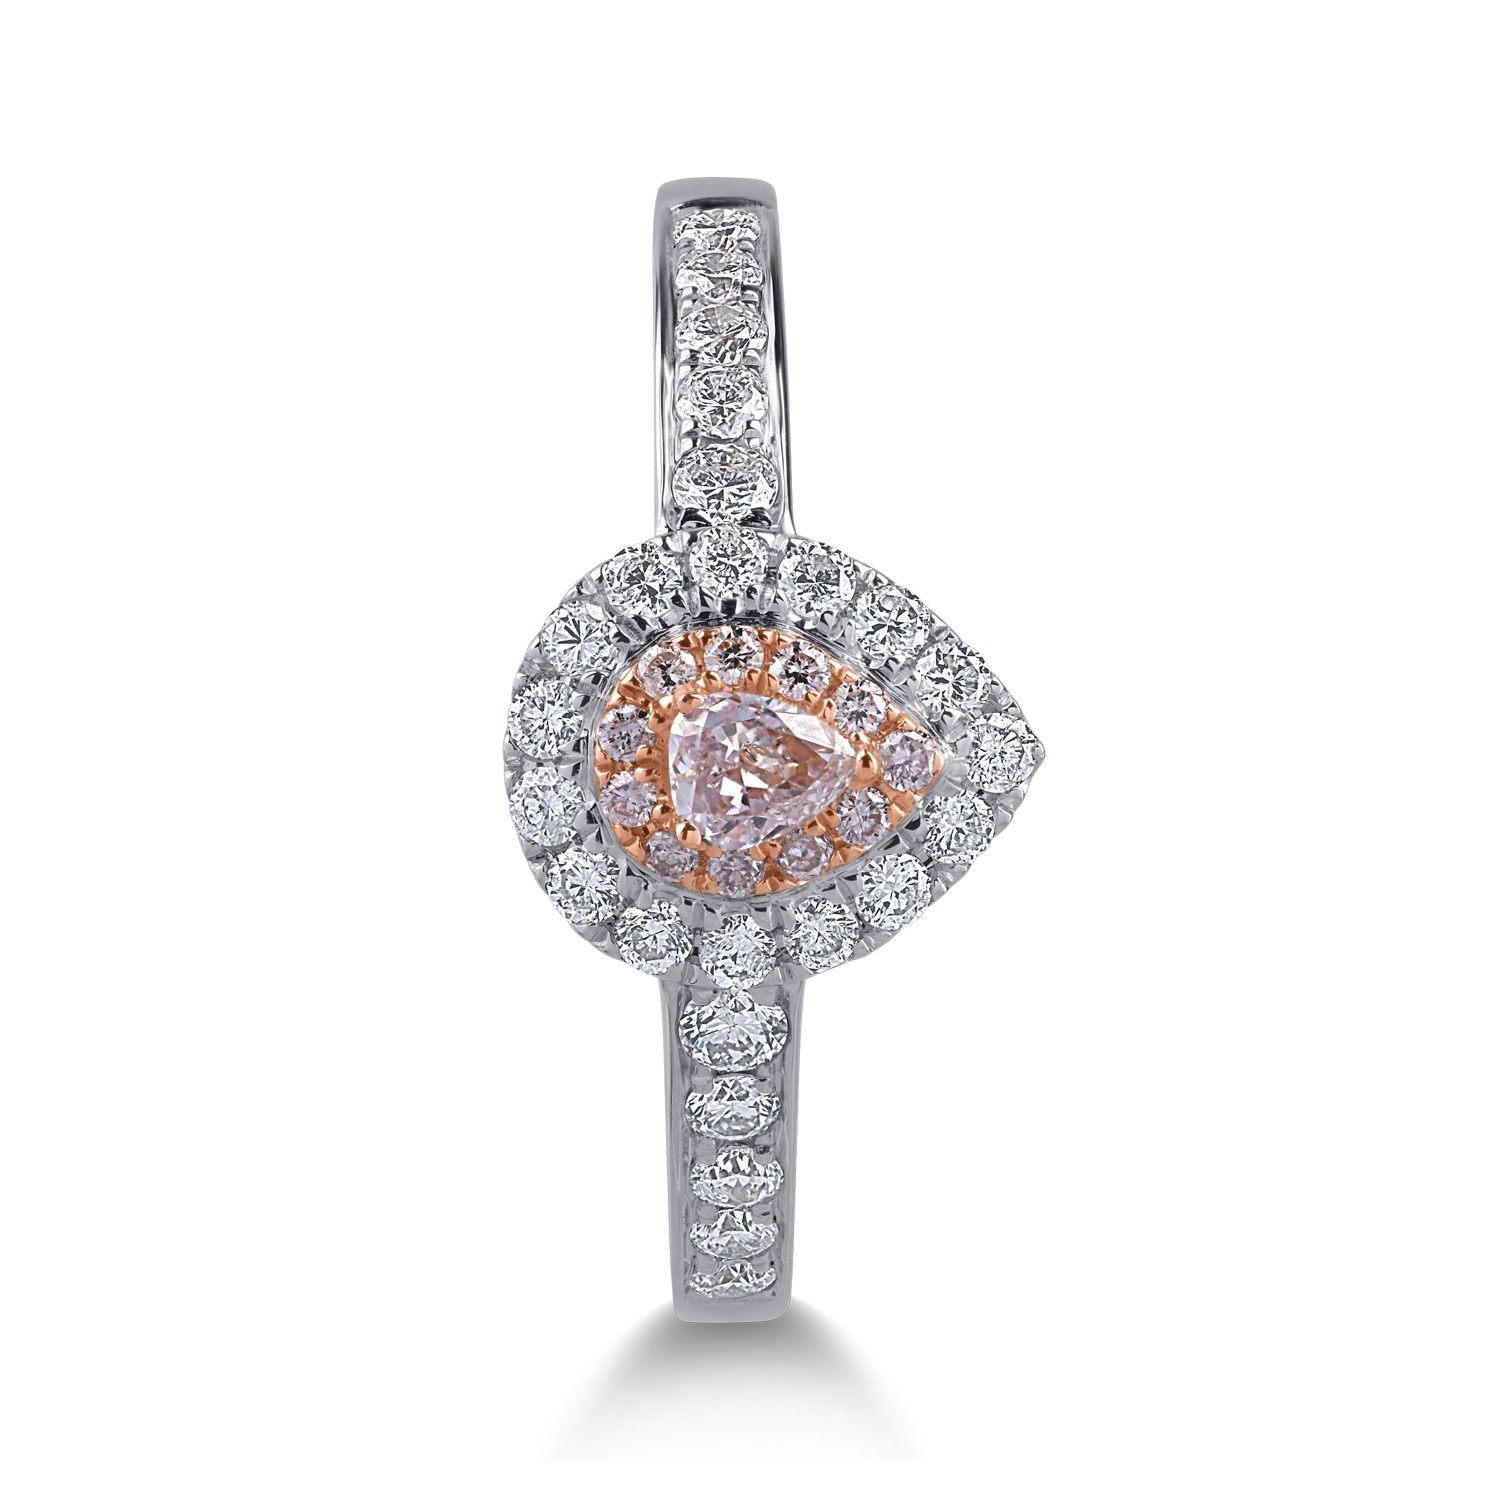 White-rose gold ring with 0.35ct clear diamonds and 0.16ct rose diamonds